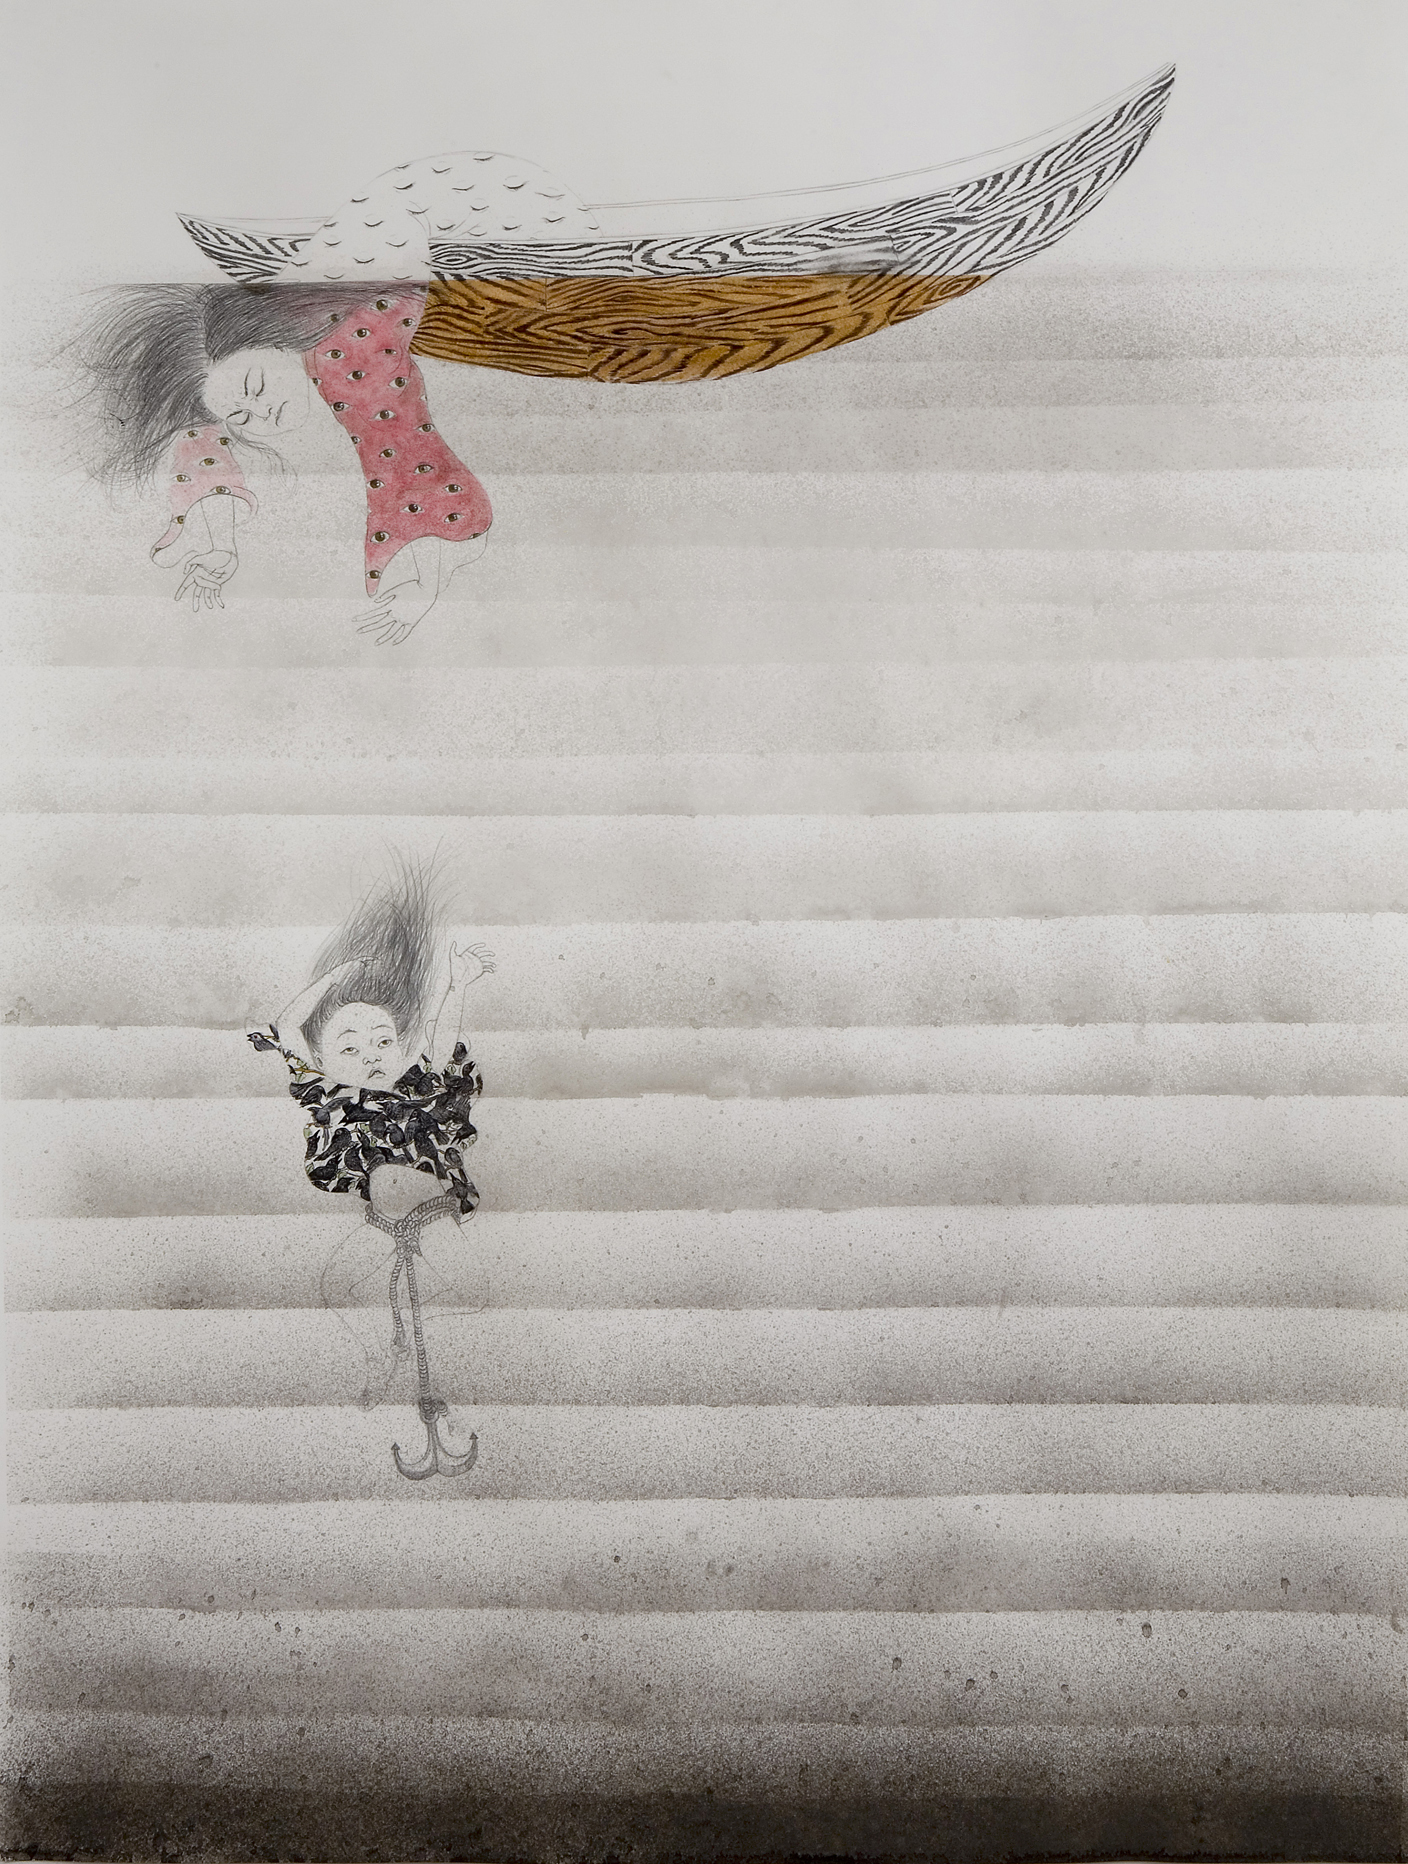   Drown , 2007 Graphite, watercolor, and ink on paper 50 X 38 inches Collection of Treger/Saint Silvestre-Art Brut Collection  